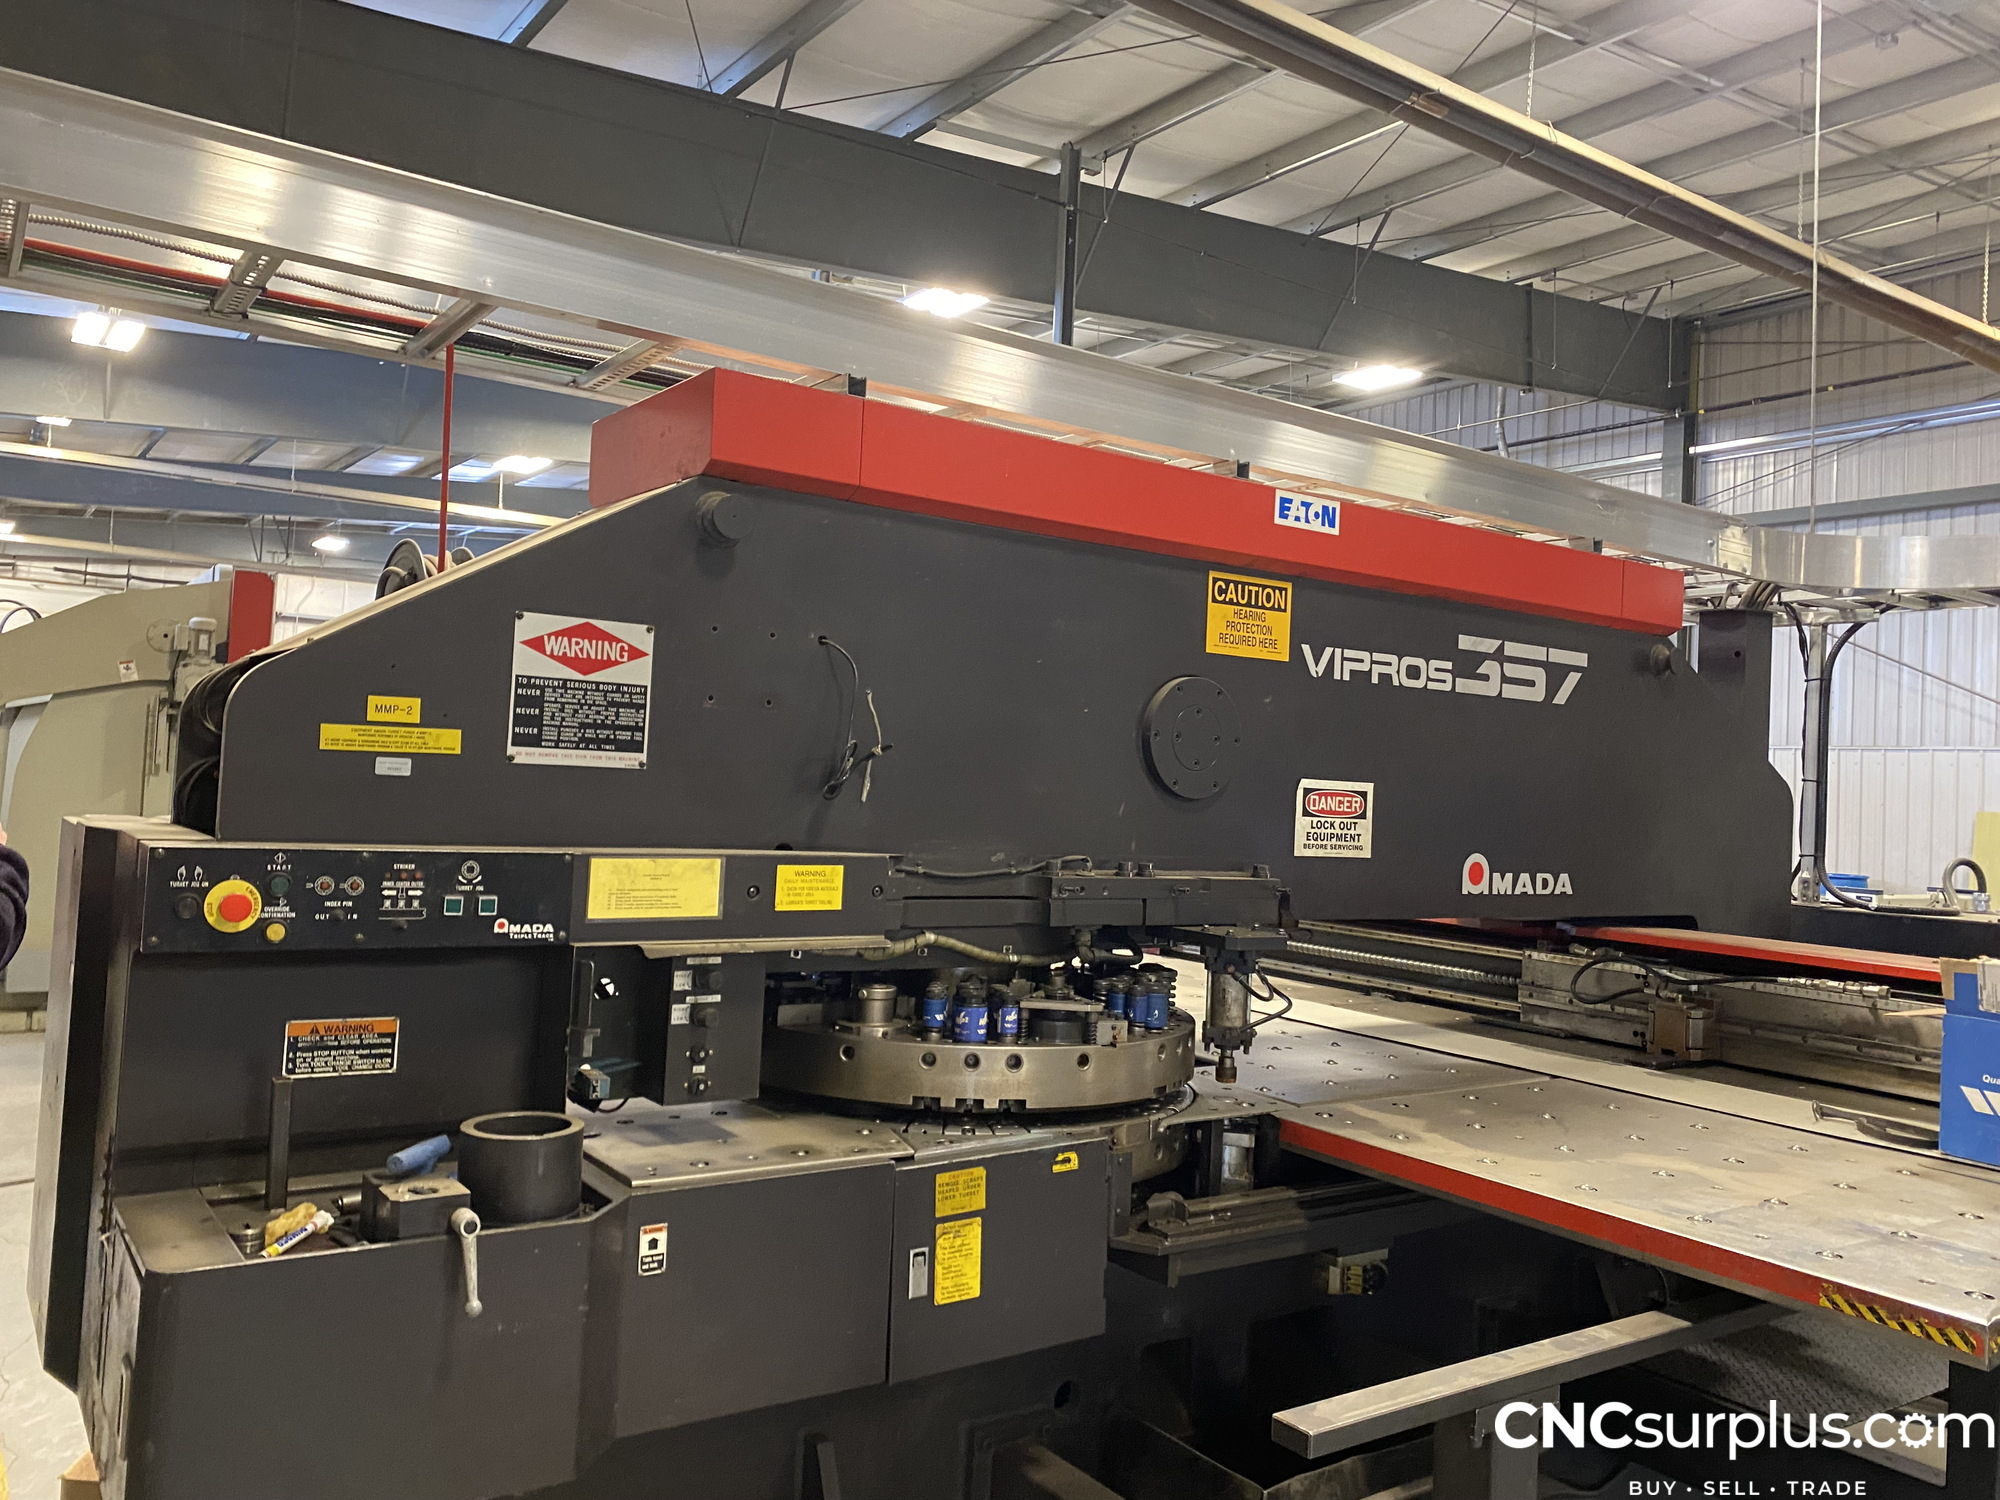 1992 AMADA 357 VIPROS Turret Punches | CNCsurplus, A Div. of Comtex Leasing Corp.